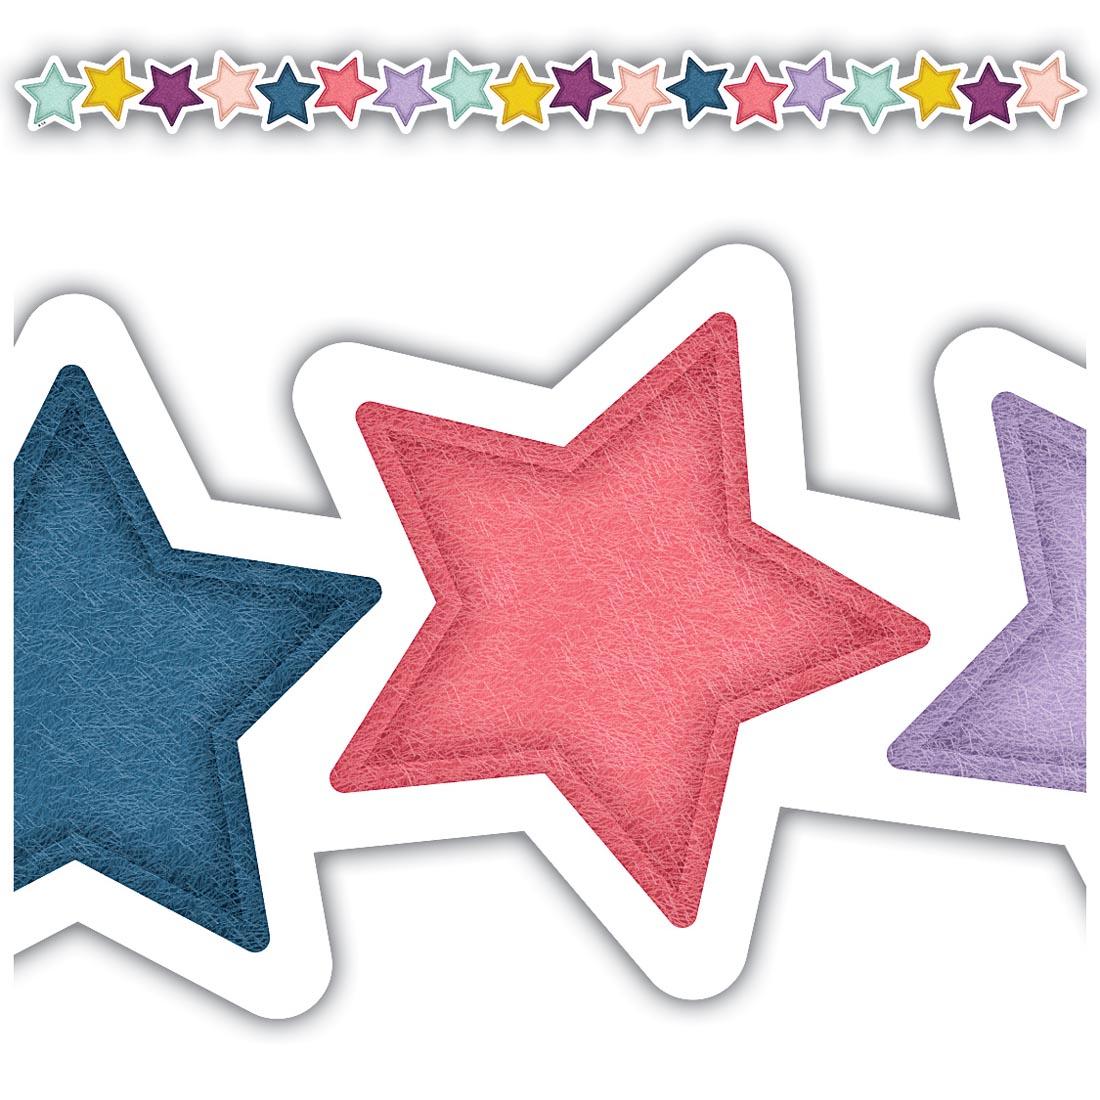 Full view and closeup of the Stars Die-Cut Border Trim from the Oh Happy Day collection by Teacher Created Resources